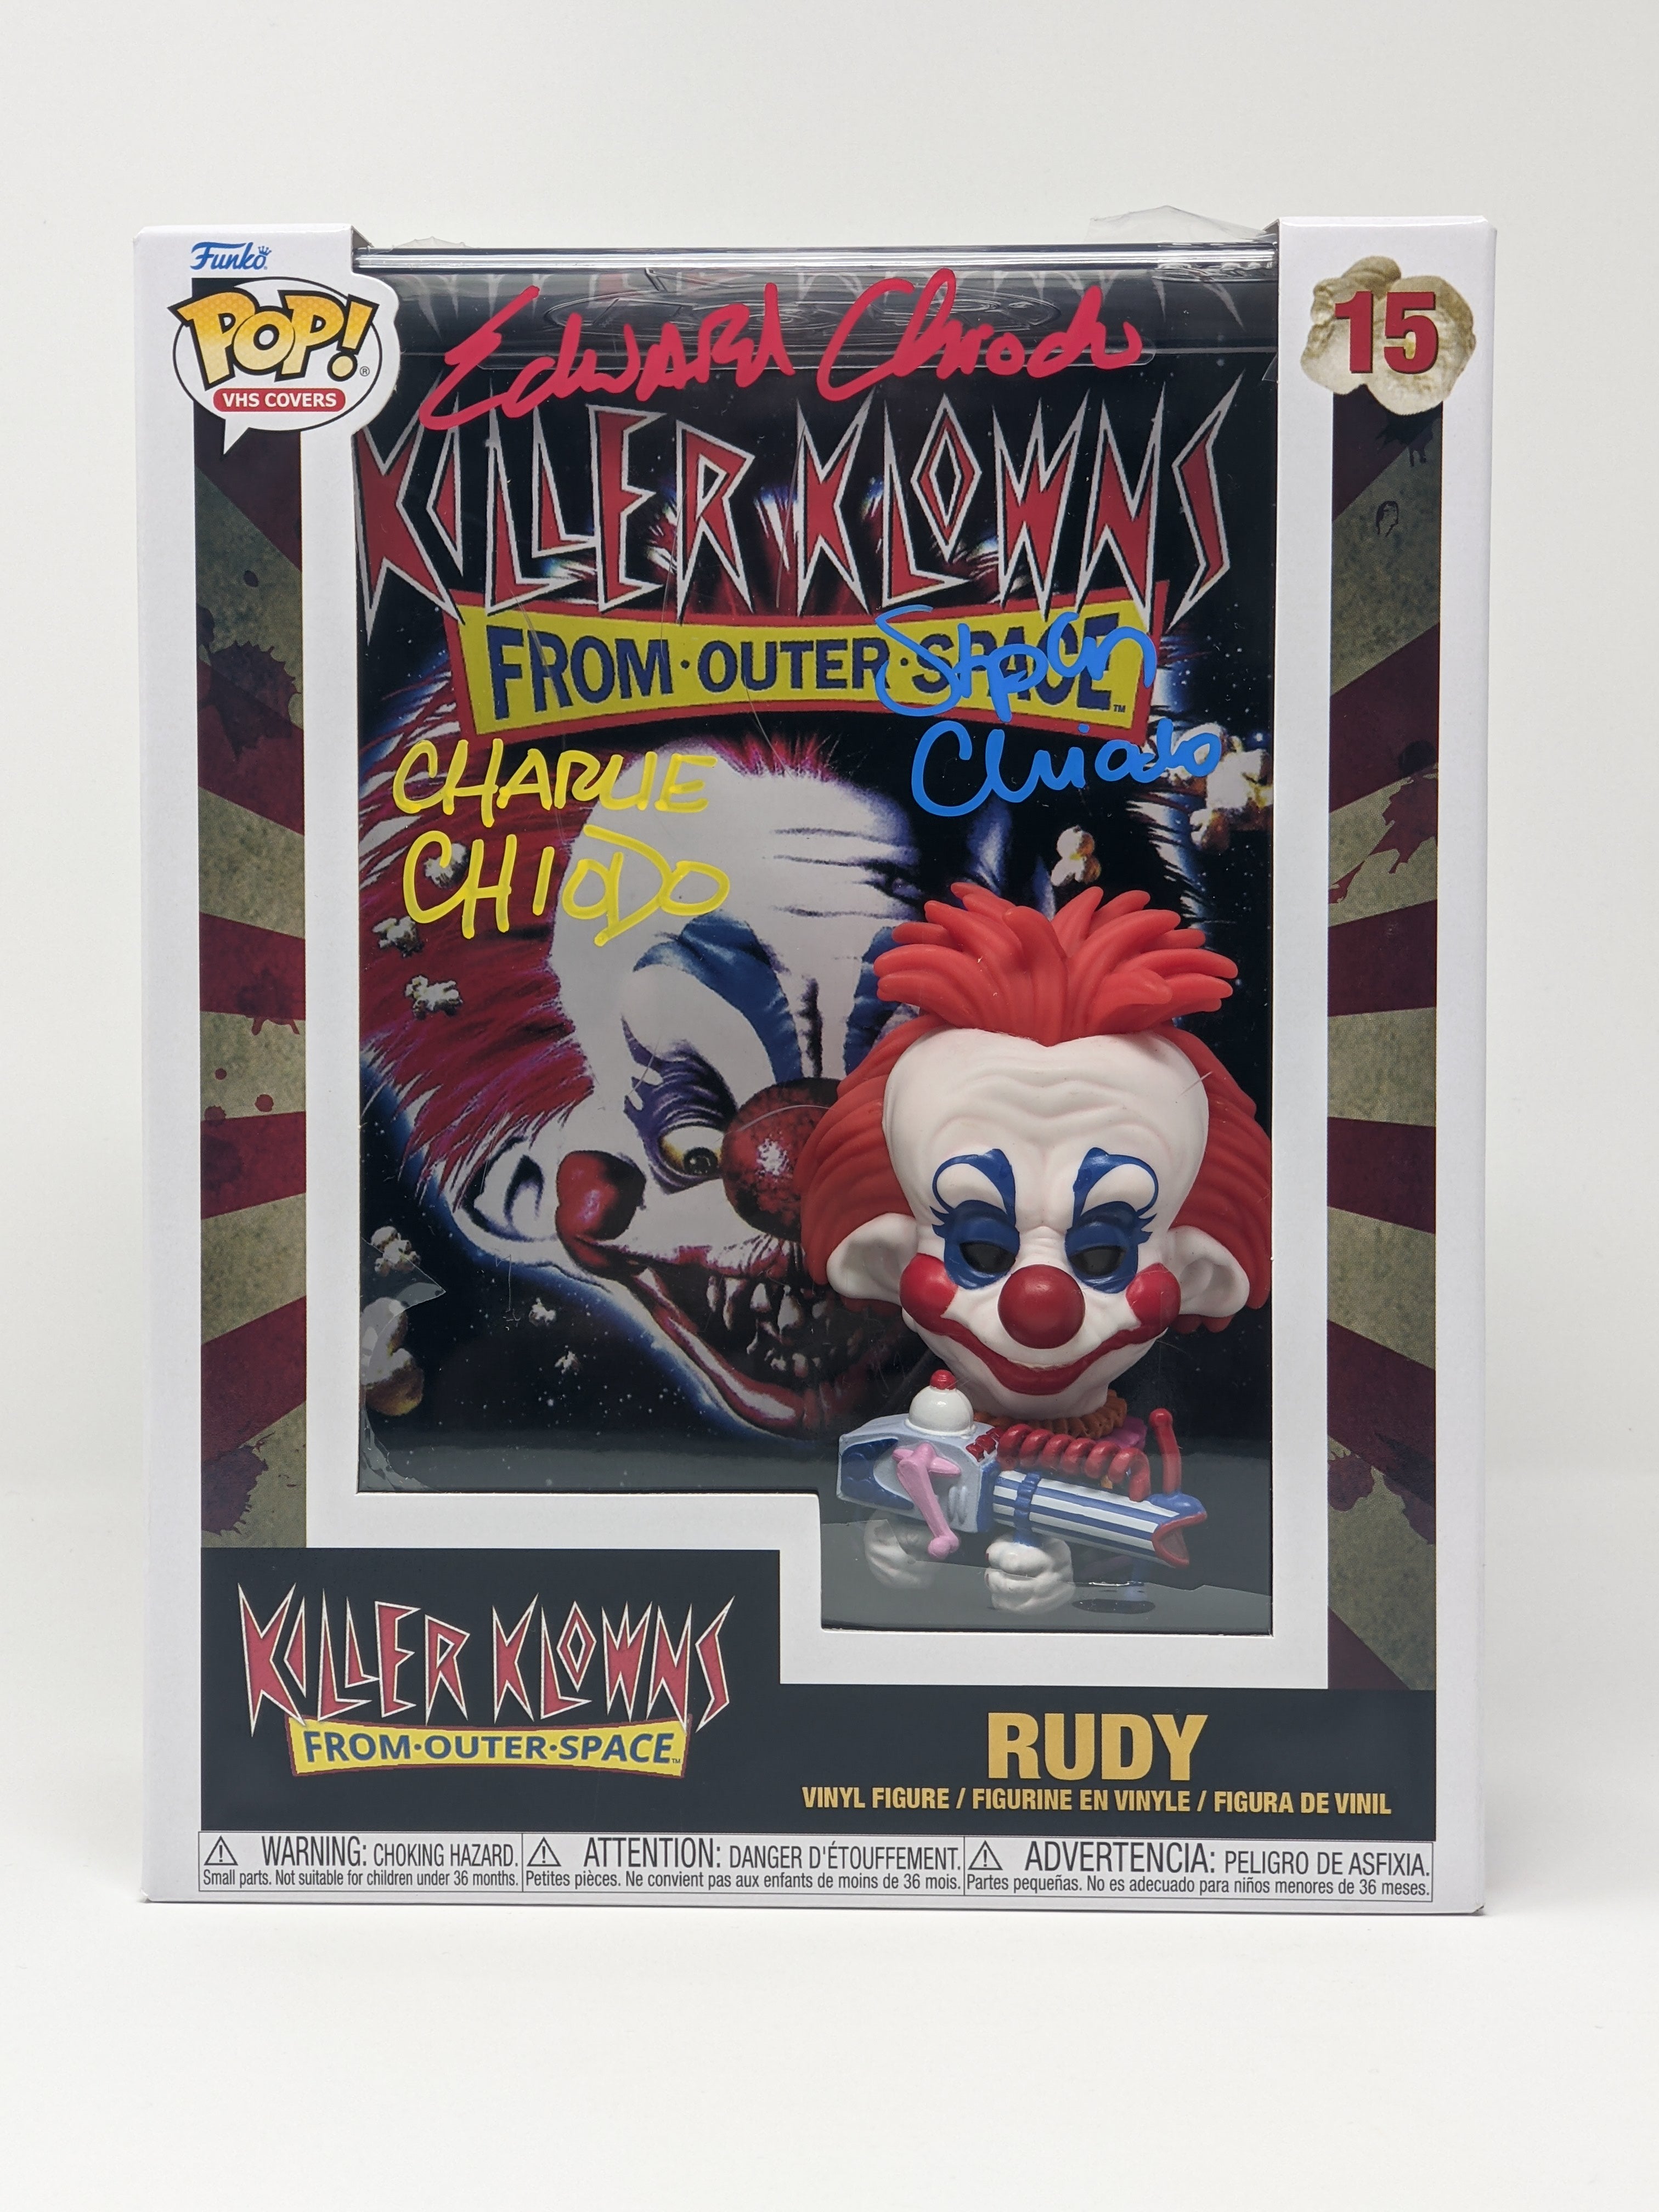 Killer Klowns From Outer Space Rudy #15 Funko Pop! VHS Cover Chiodo Brothers Signed JSA Autograph